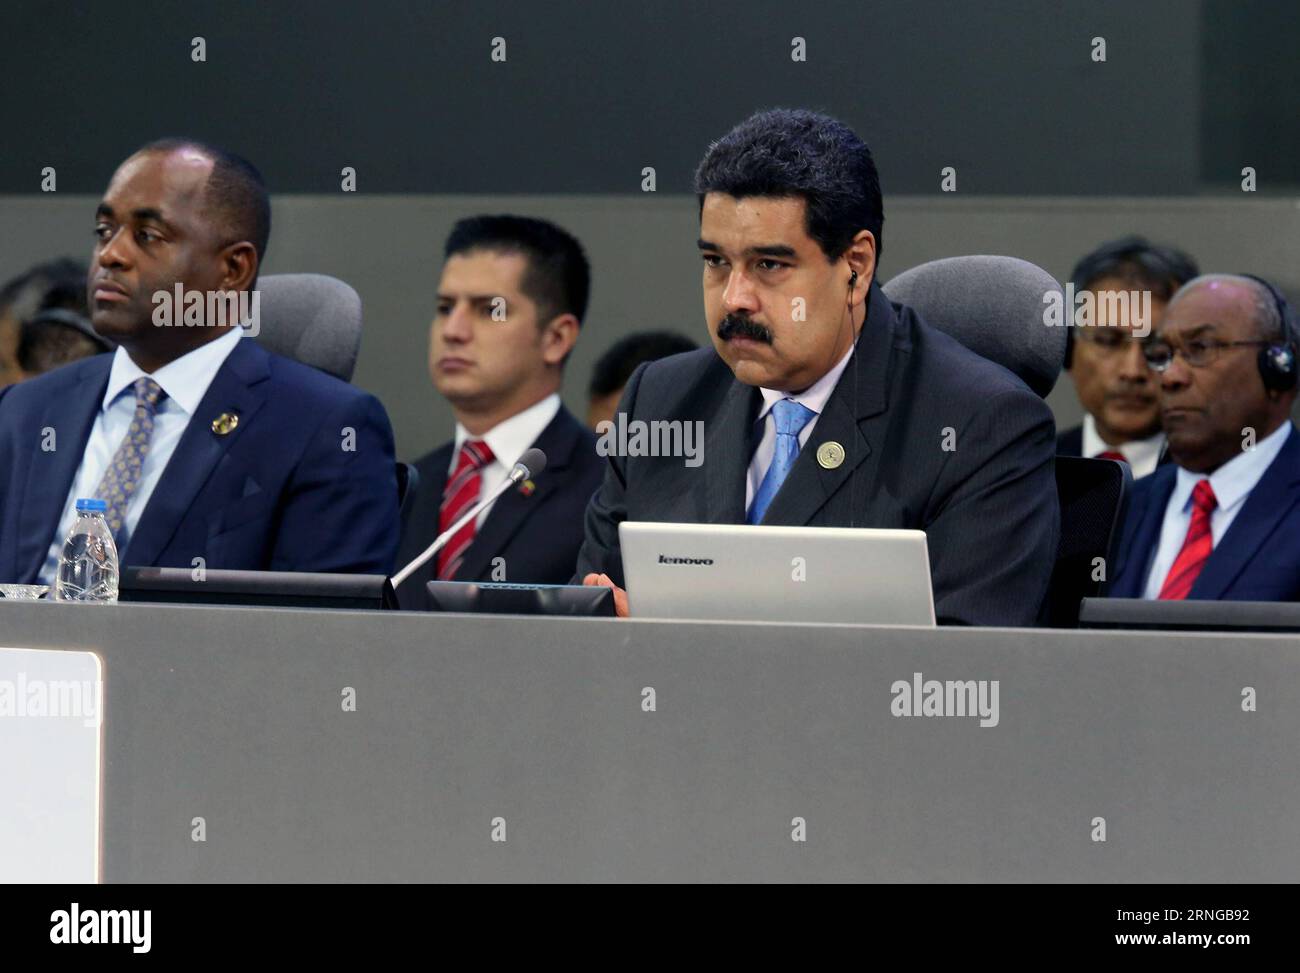 (160919) -- MARGARITA, Sept. 19, 2016 -- Venezuelan President Nicolas Maduro (R) takes part in the High-Level Plenary Meeting of the 17th Summit of the Non-Aligned Movement (NAM) in Margarita Island of Venezuela, on Sept. 18, 2016. ) (egp) (ah) VENEZUELA-MARGARITA-NAM SUMMIT-MADURO AVN PUBLICATIONxNOTxINxCHN   160919 Margarita Sept 19 2016 Venezuelan President Nicolas Maduro r Takes Part in The High Level Plenary Meeting of The 17th Summit of The Non Aligned Movement Nam in Margarita Iceland of Venezuela ON Sept 18 2016 EGP AH Venezuela Margarita Nam Summit Maduro AVN PUBLICATIONxNOTxINxCHN Stock Photo